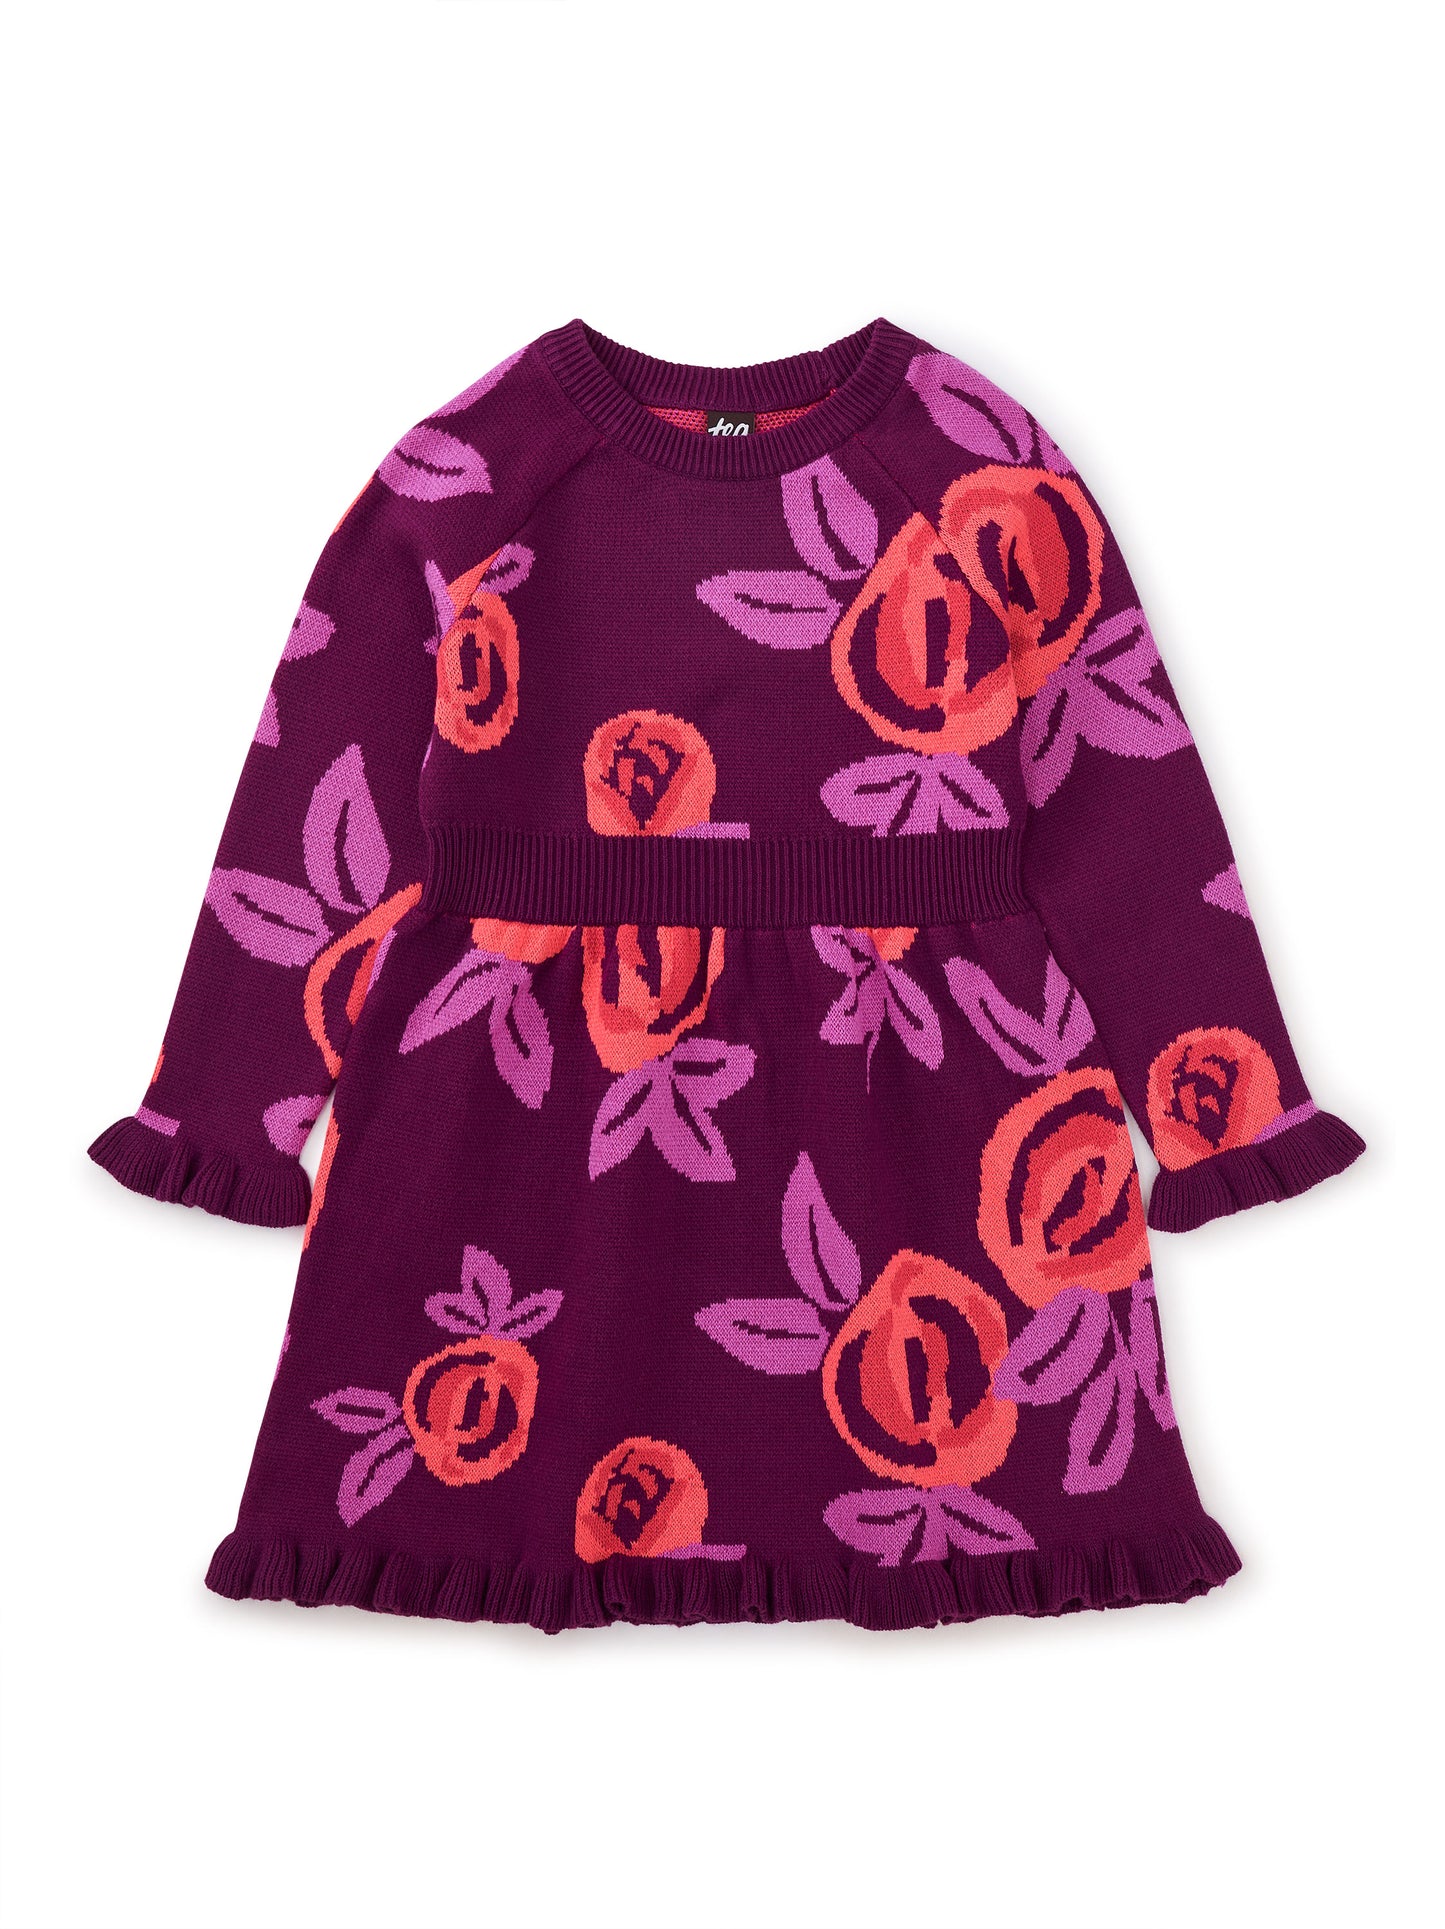 French Rose Toddler Sweater Dress